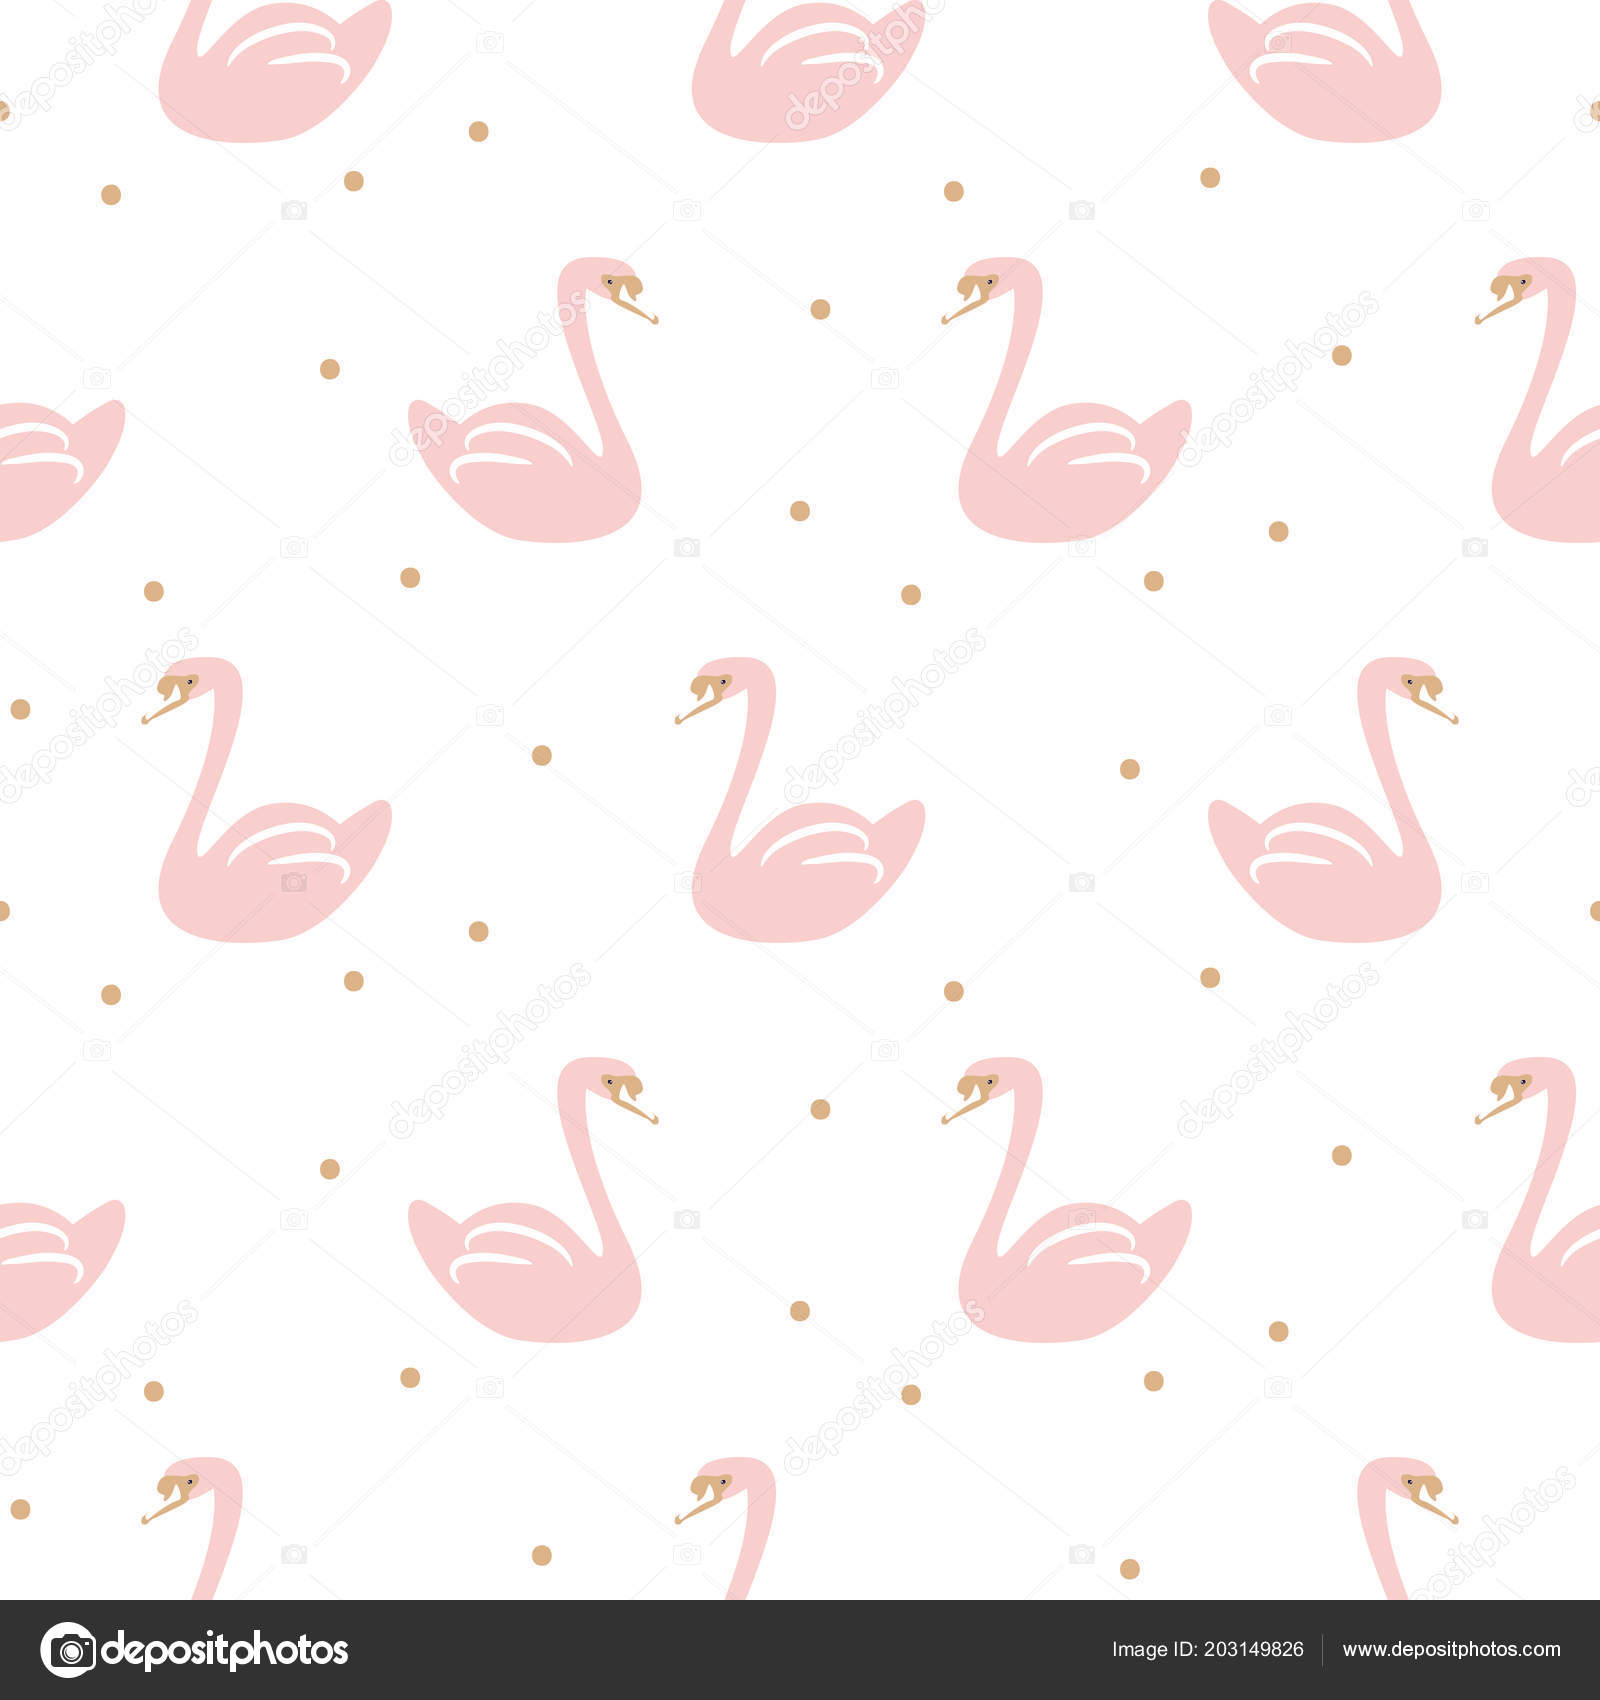 Swan pink cute baby simple seamless vector pattern. Stock Vector Image by  ©TapkiMonkey #203149826